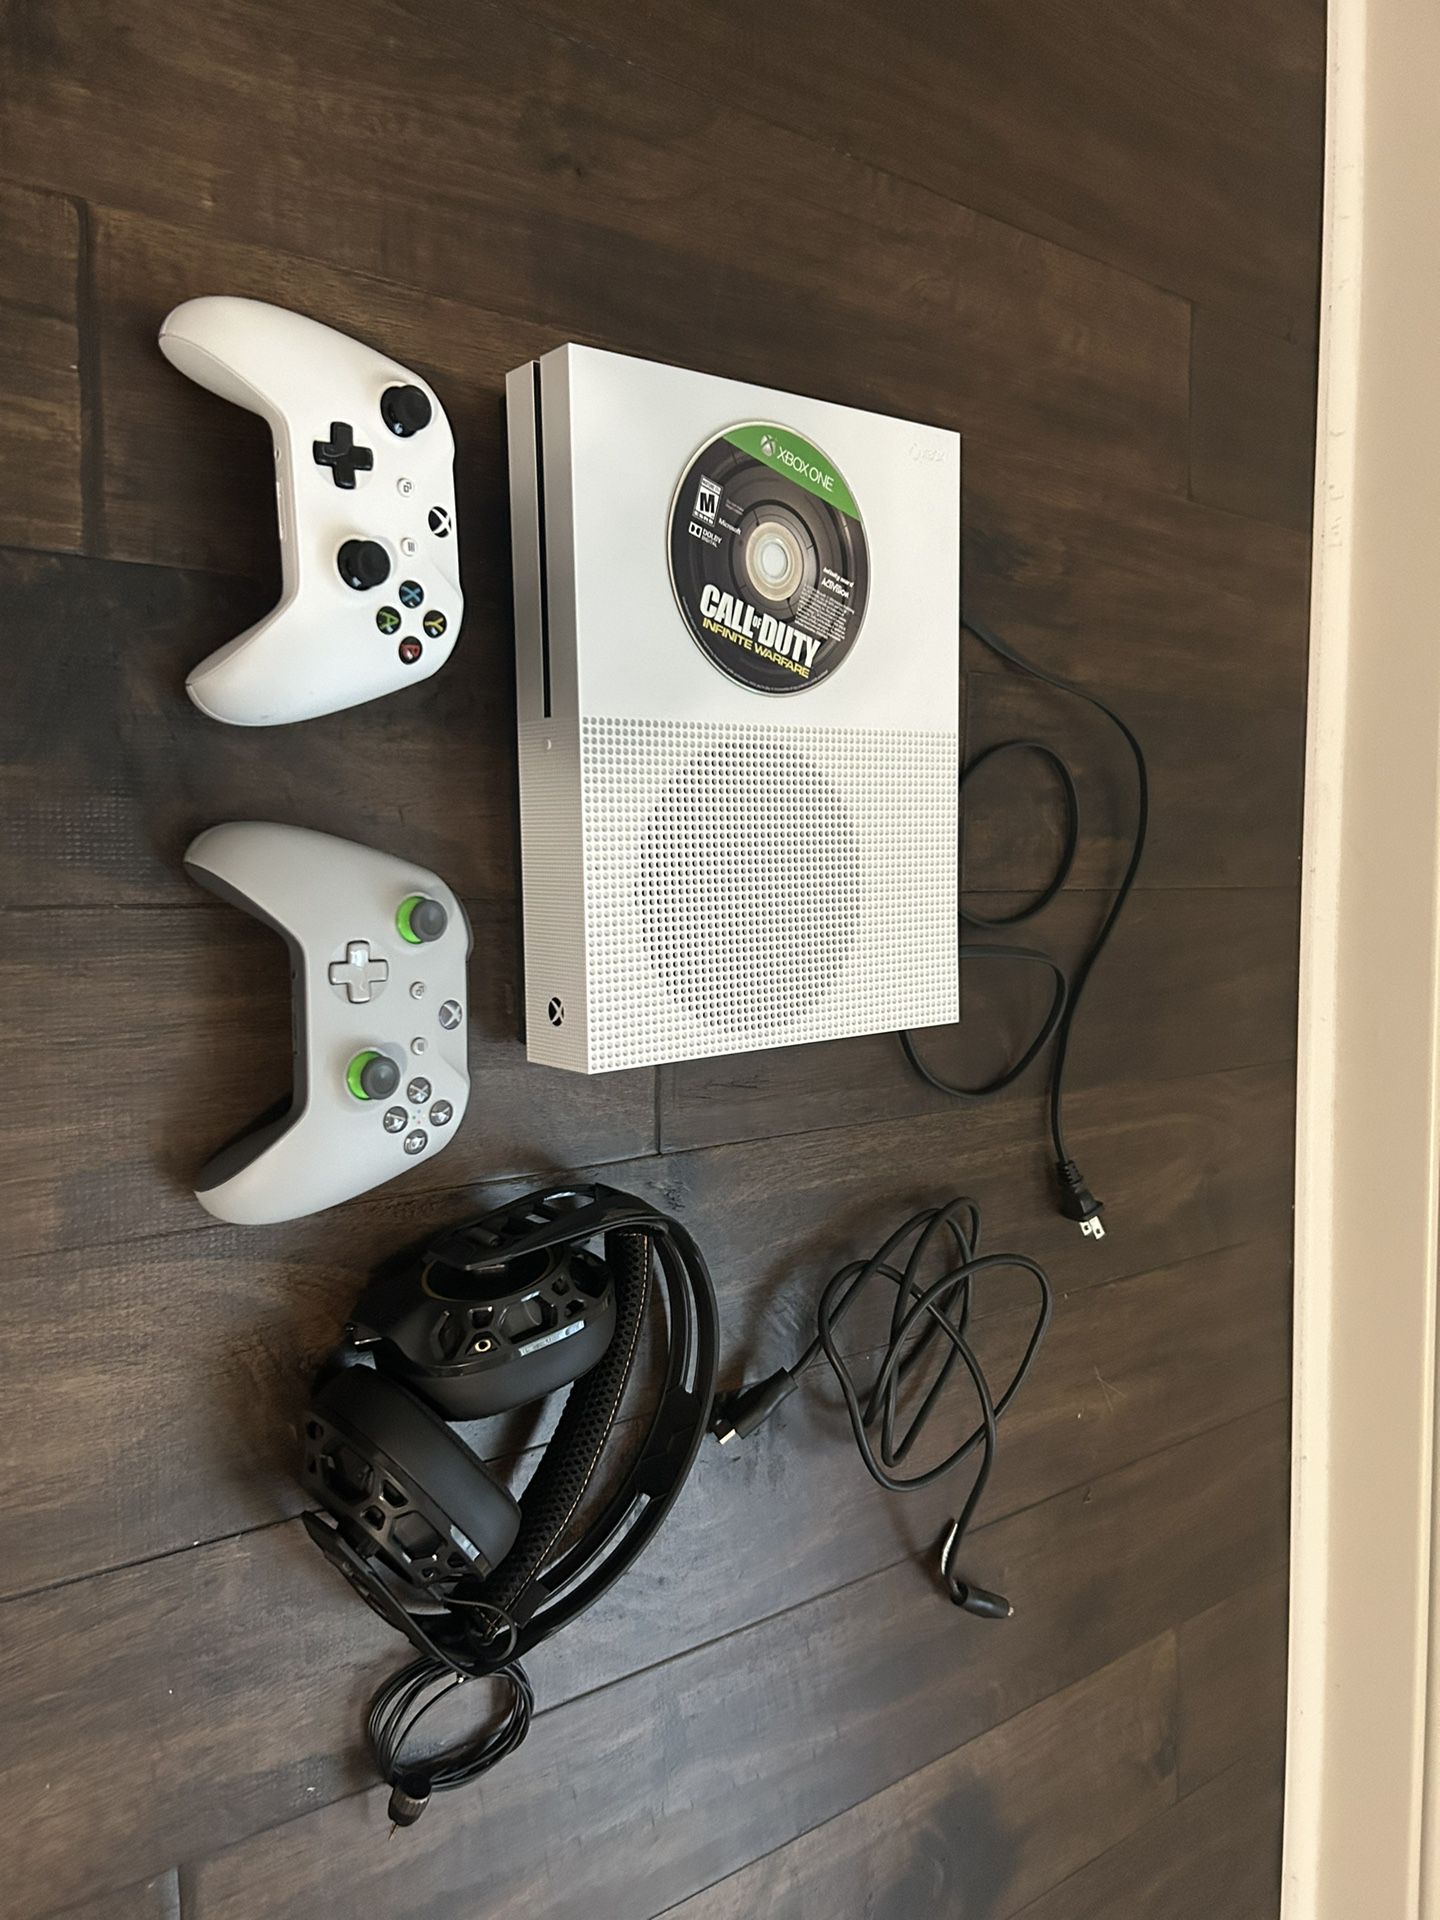 Xbox One S, Two controller’s And  Gaming headset